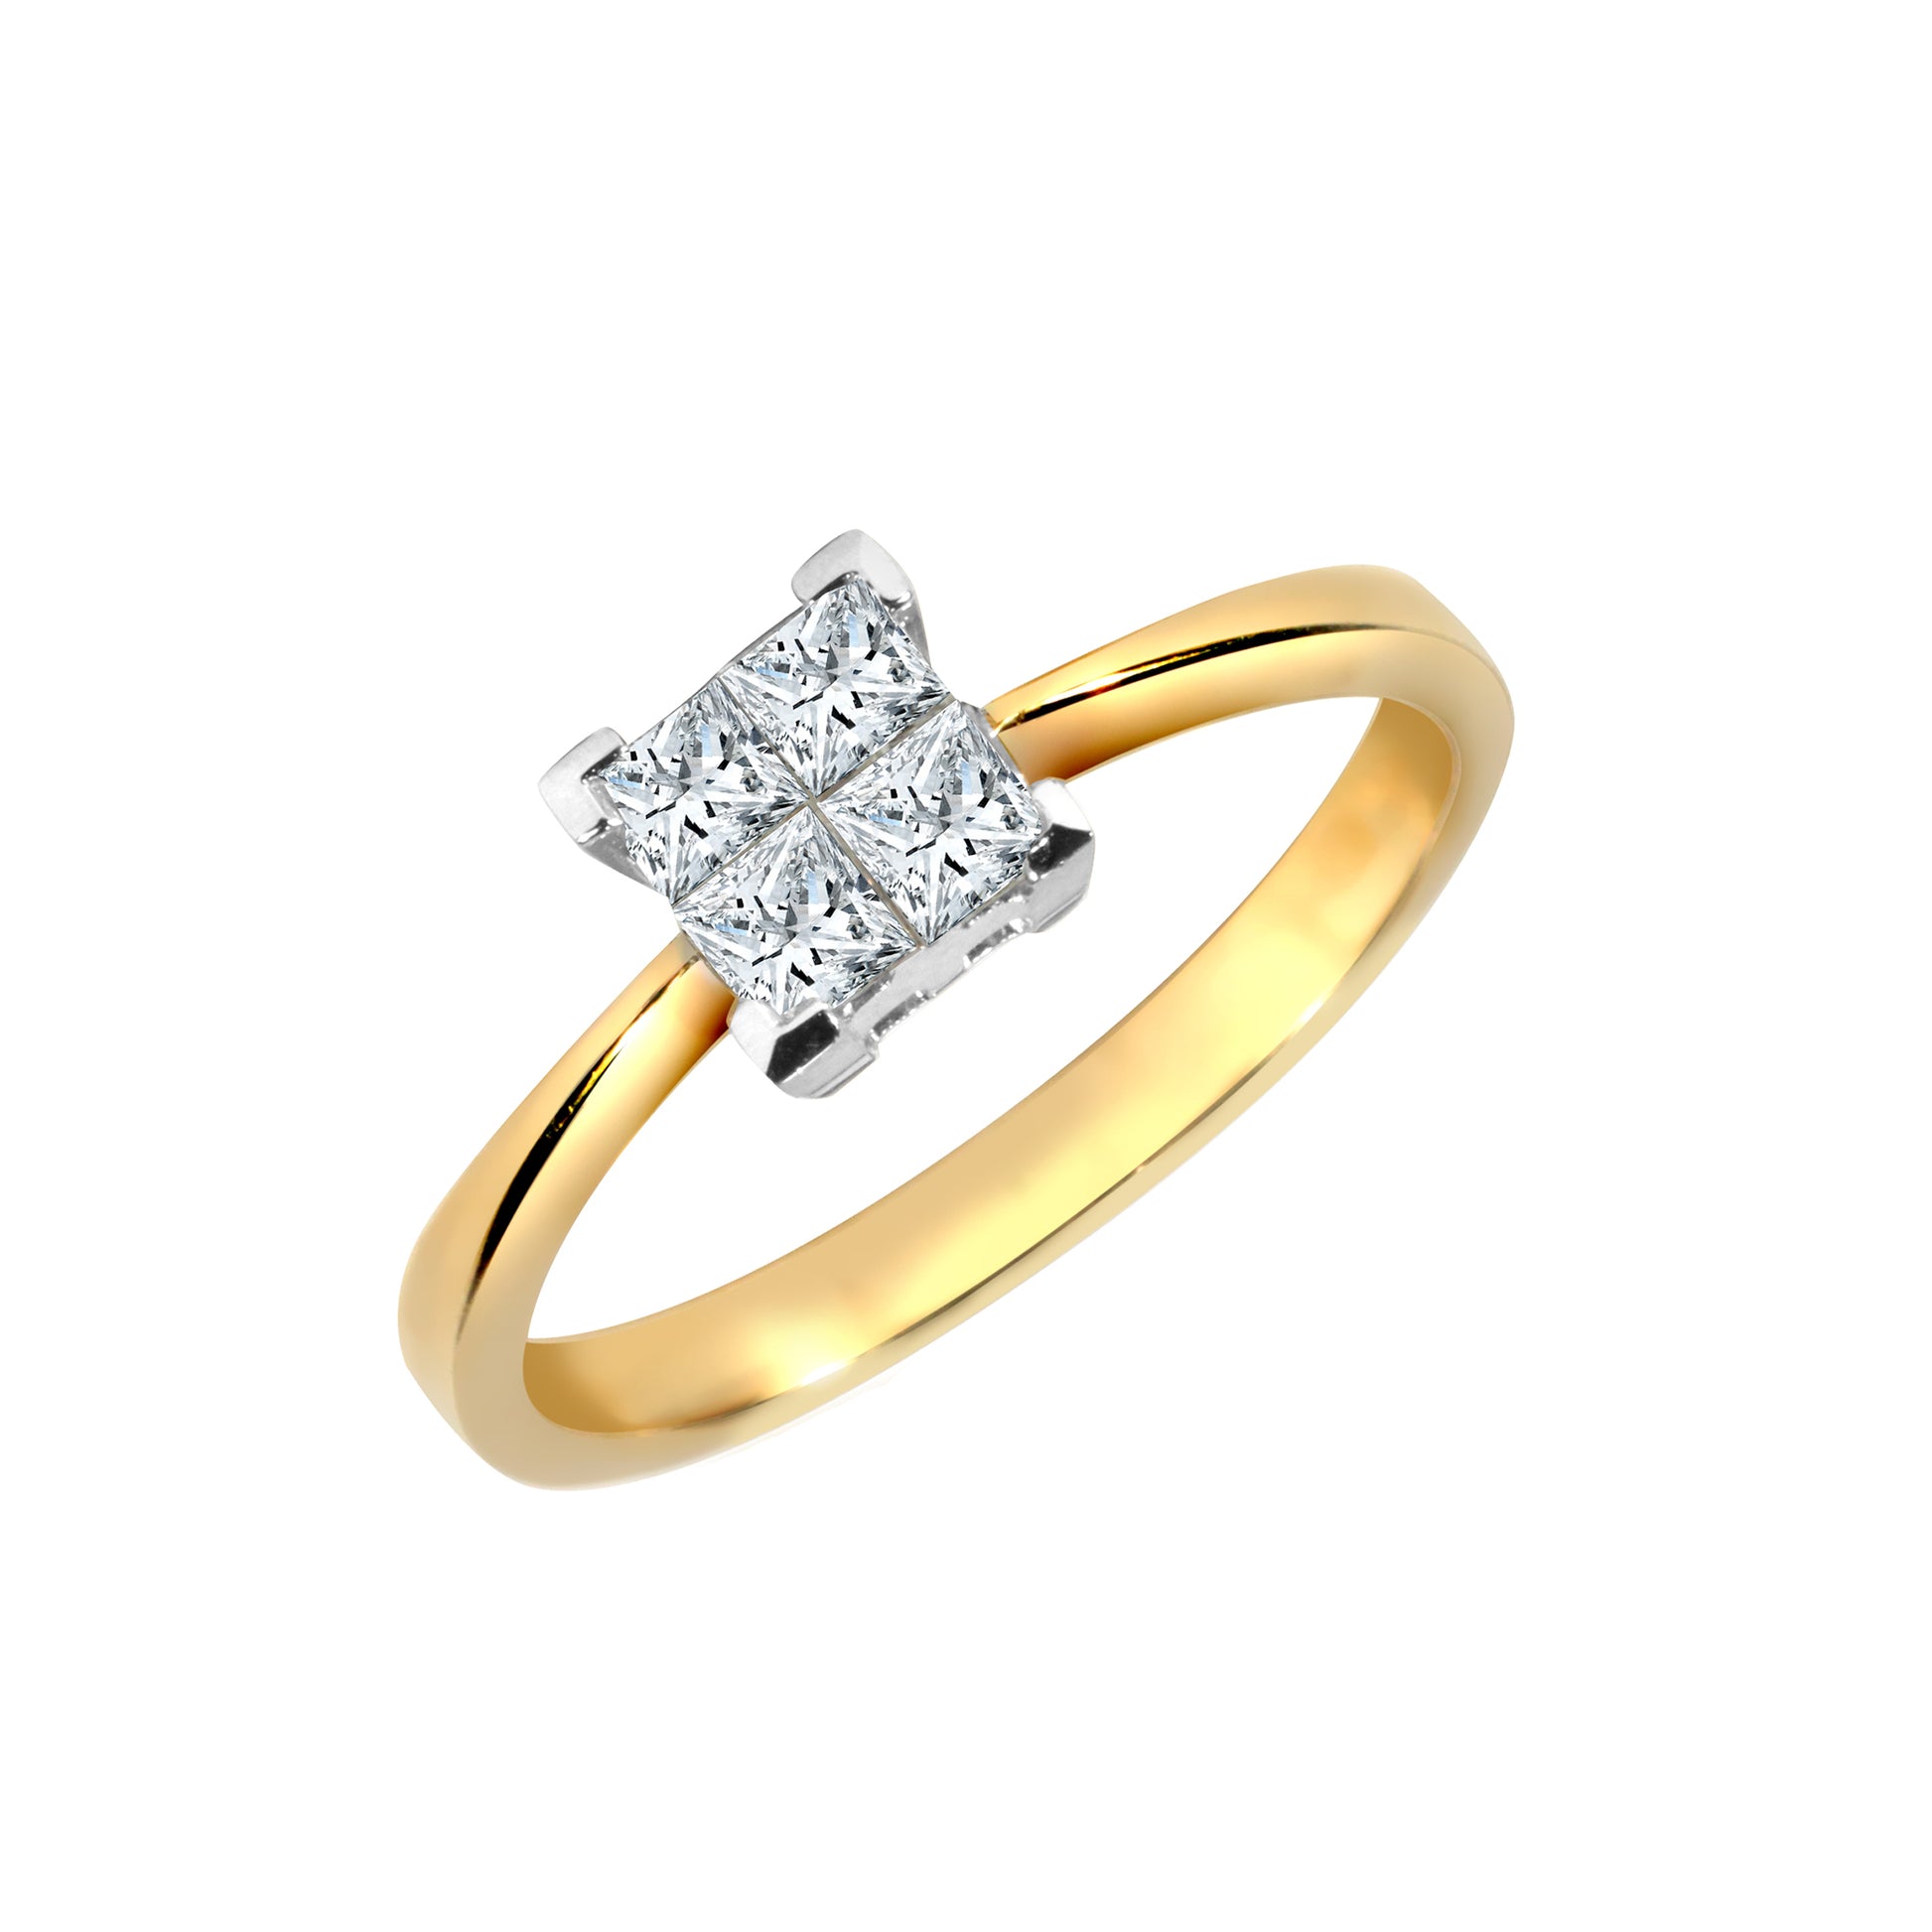 18ct Gold  Diamond 4 Stone Illusion Solitaire Engagement Ring 7mm - 18R161-075